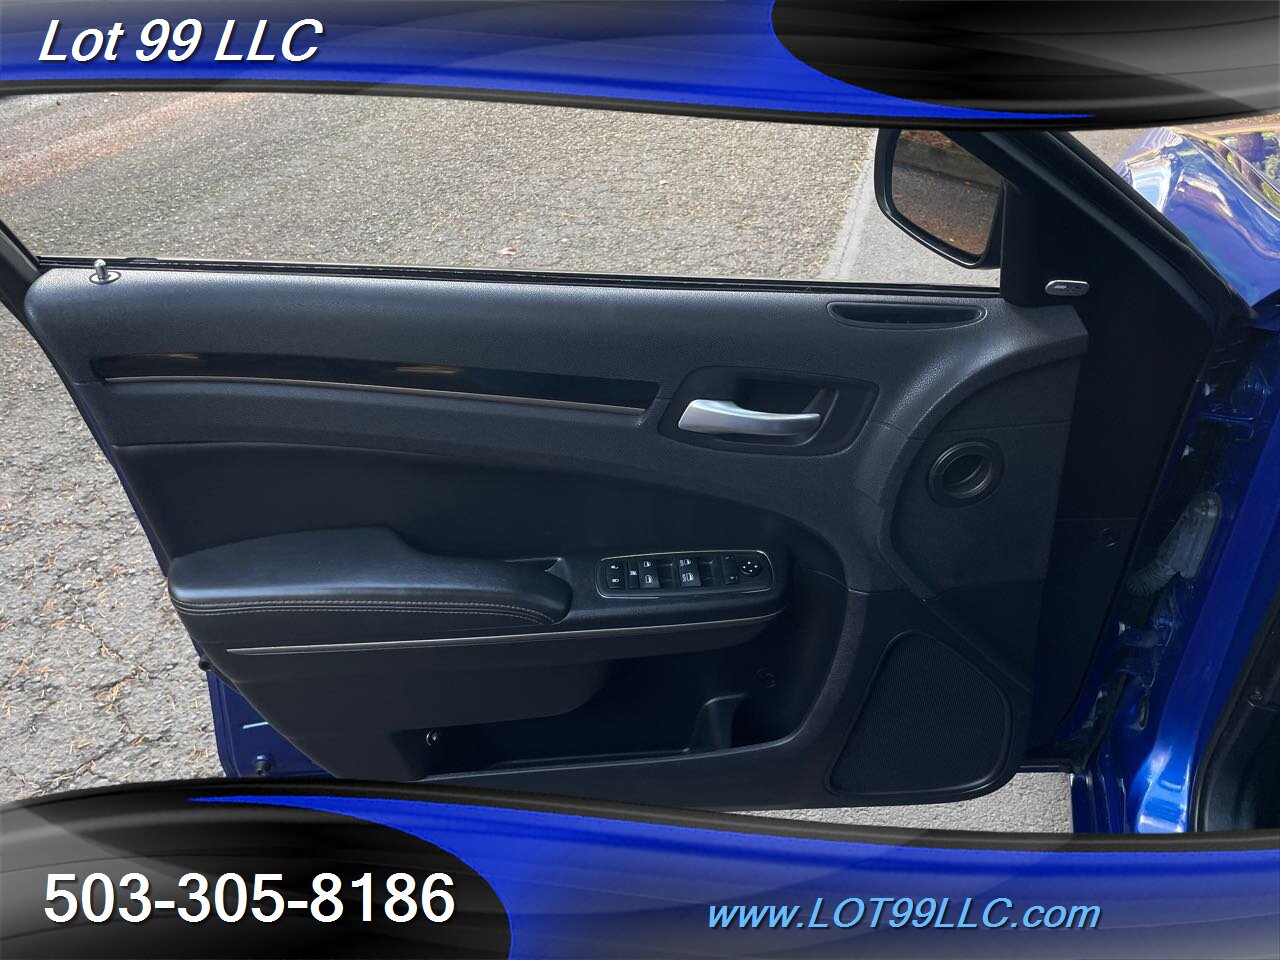 2019 Chrysler 300 Series 300S Pano Roof 52k Miles Navigation Htd Leather   - Photo 12 - Milwaukie, OR 97267